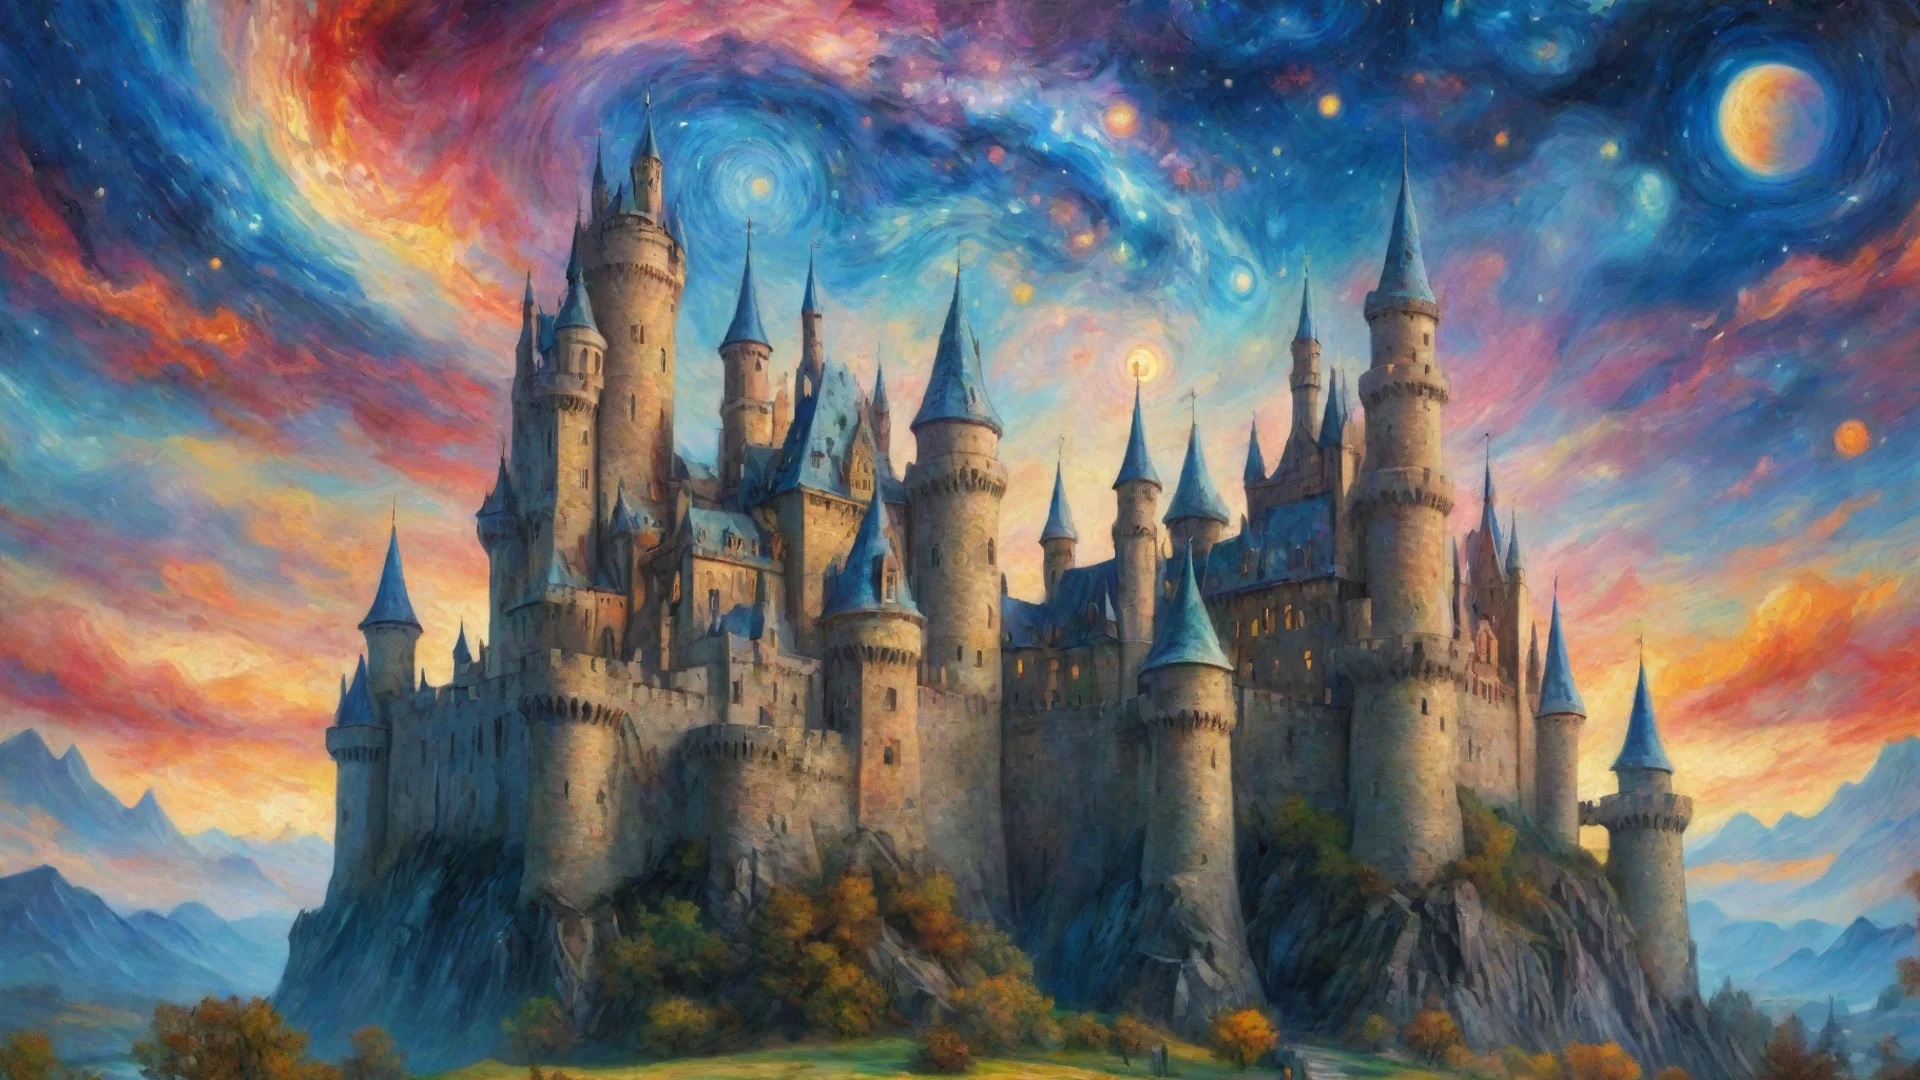 aiamazing epic castle with colorful artistic sky planets van gogh style detailed hd asthetic castle awesome portrait 2 wide